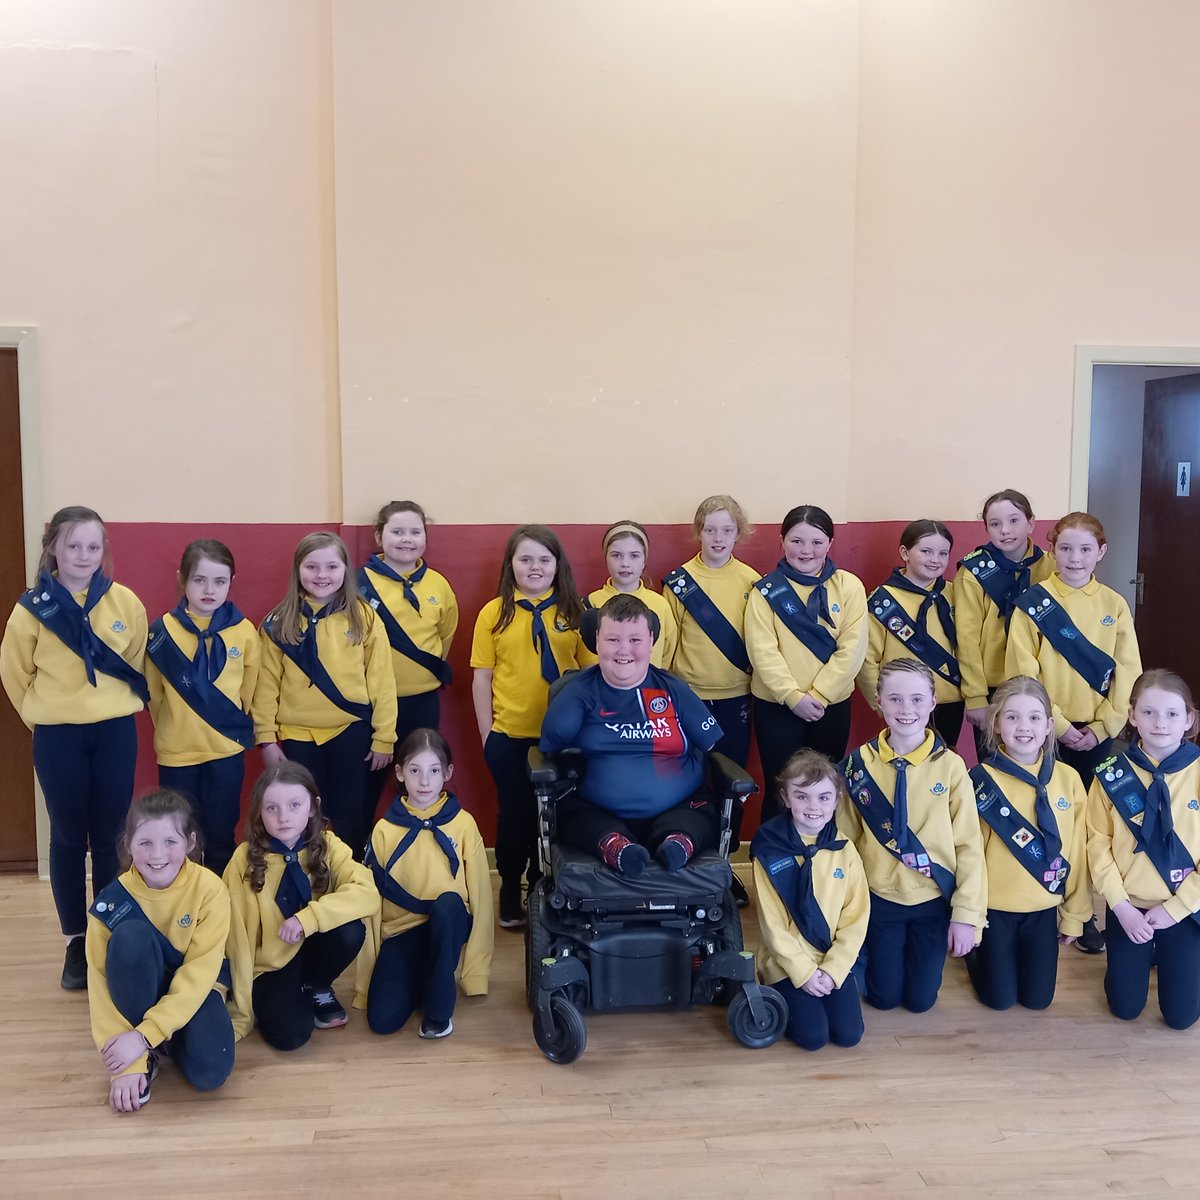 The Ballybay Brownie Guides had an incredible session with Daire Gorman, where he shared his everyday challenges navigating in his wheelchair. This insightful discussion was part of their Disability Awareness Dadge journey.🌈 Kudos to Daire for his openness #GivingGirlsConfidence